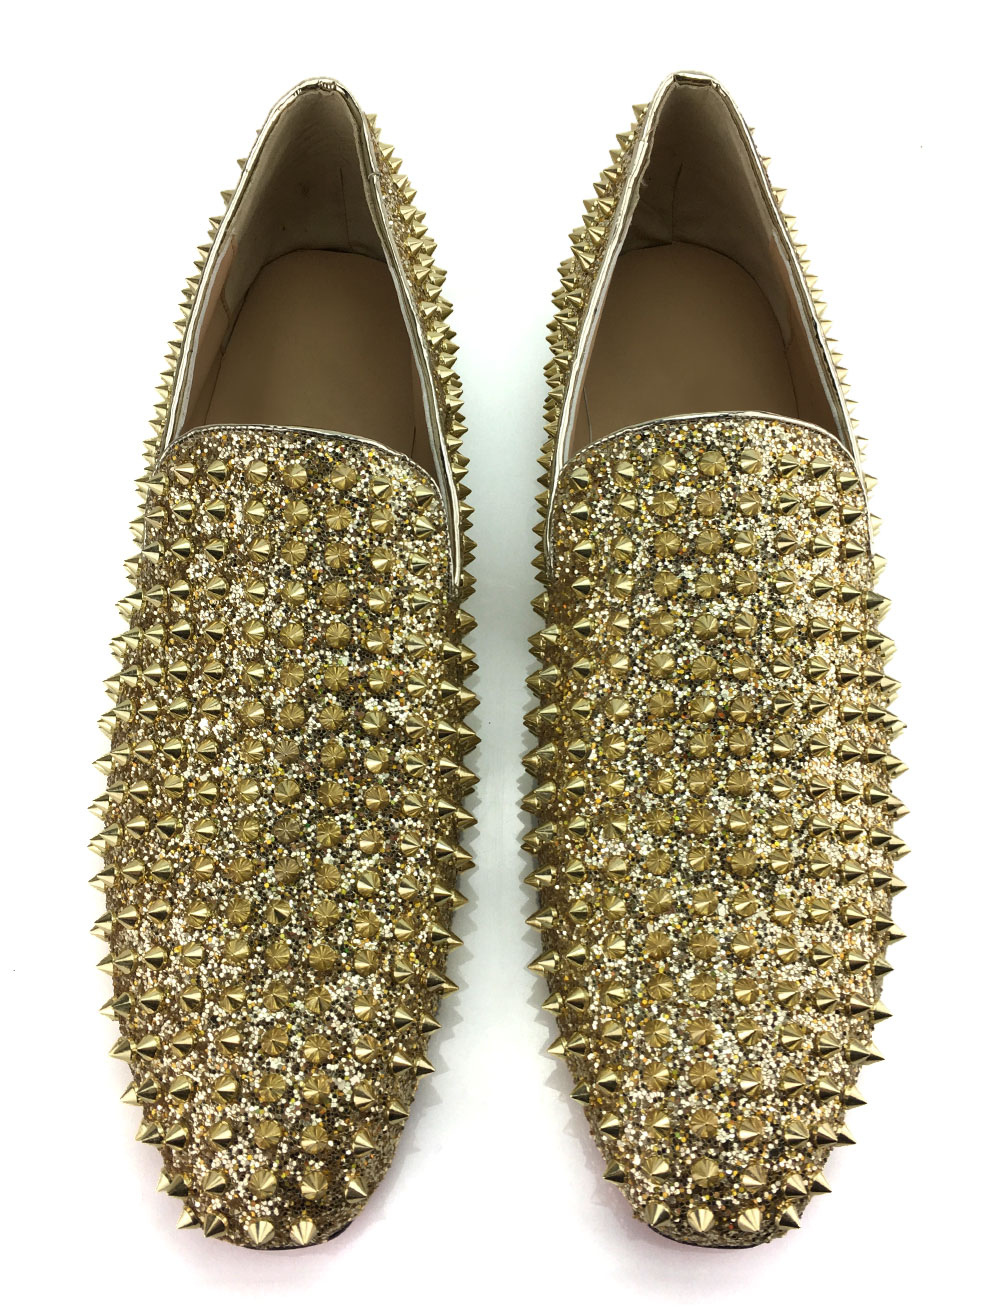 gold slip on loafers